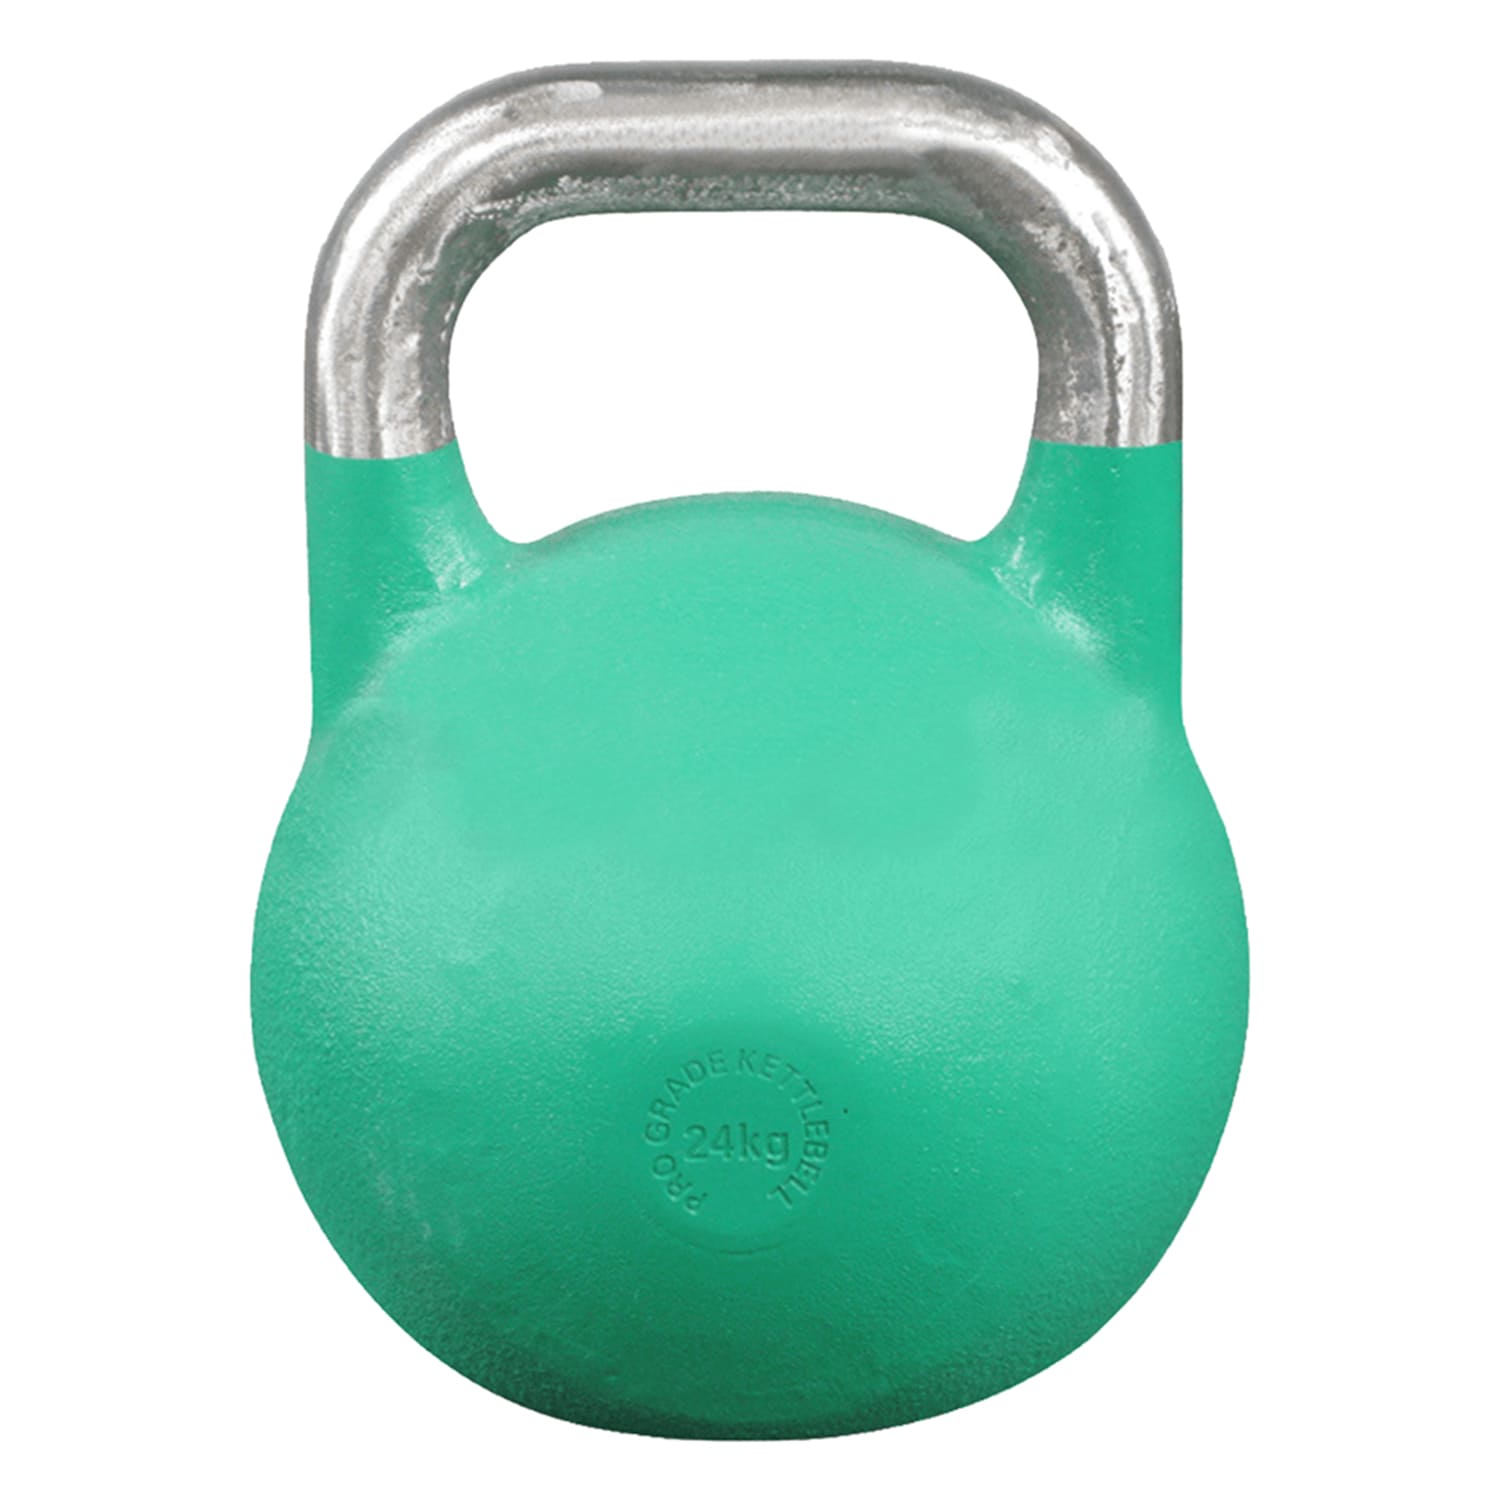 Force USA Pro Grade Competition Kettlebell, 24 Kg